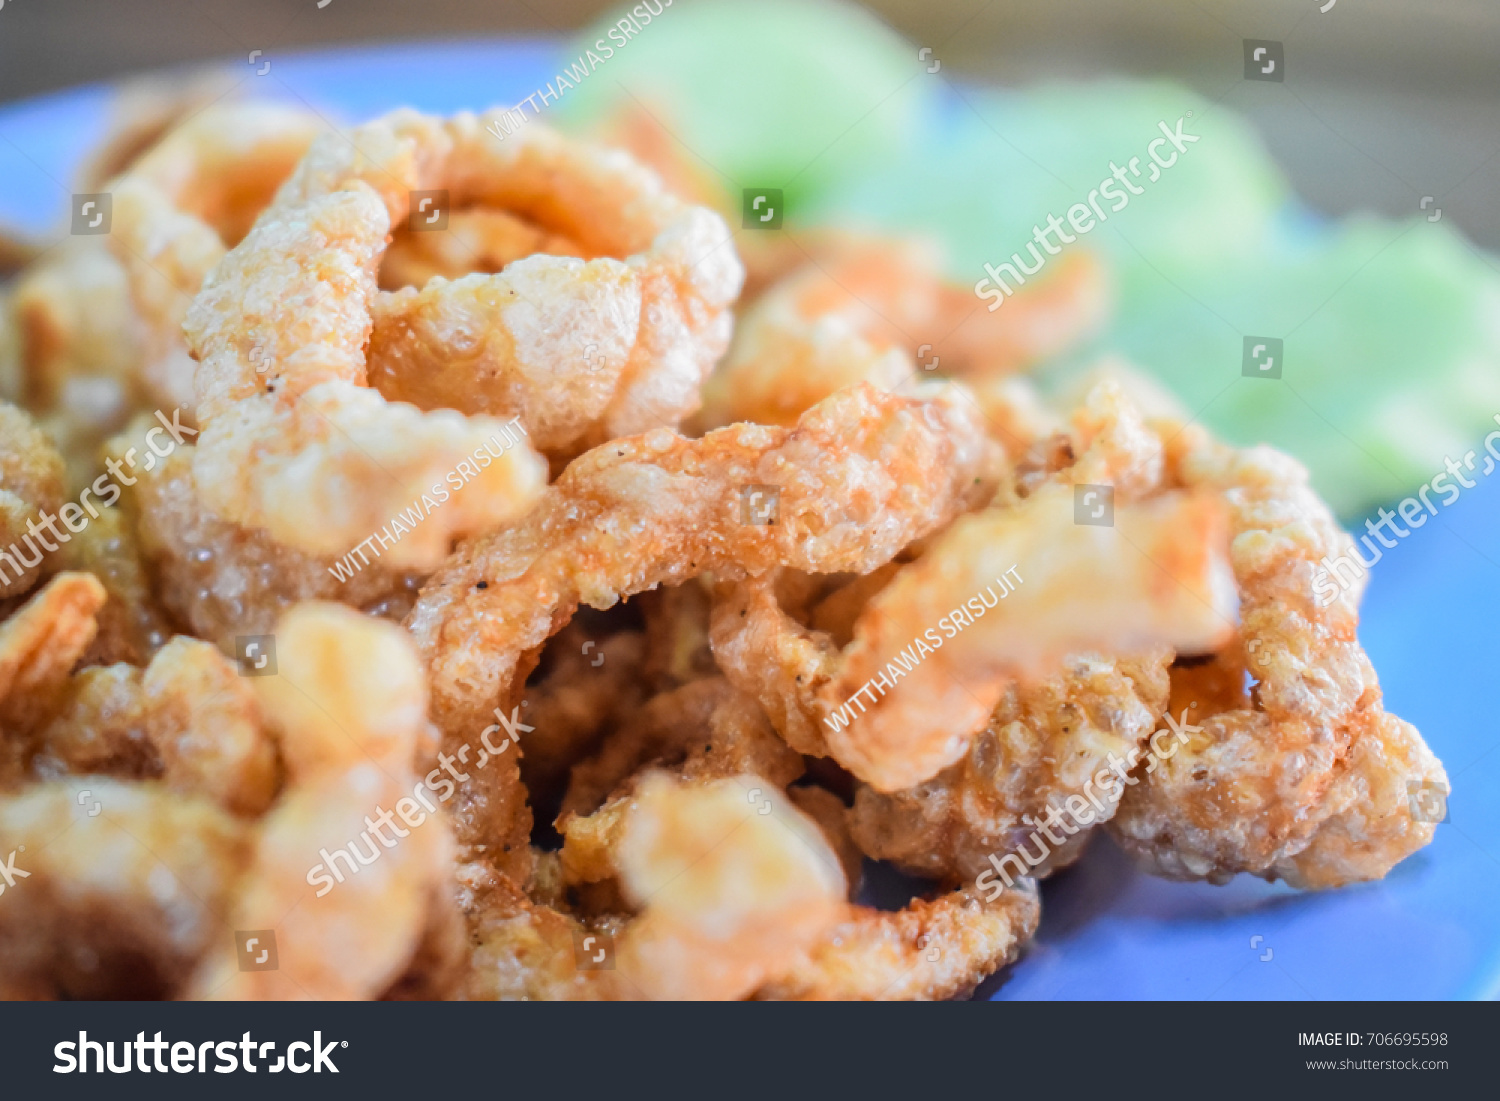 pork crackling, It can also be fried or roasted in pork fat as a snack. The frying renders much of the fat that is attached to the uncooked rind. #706695598